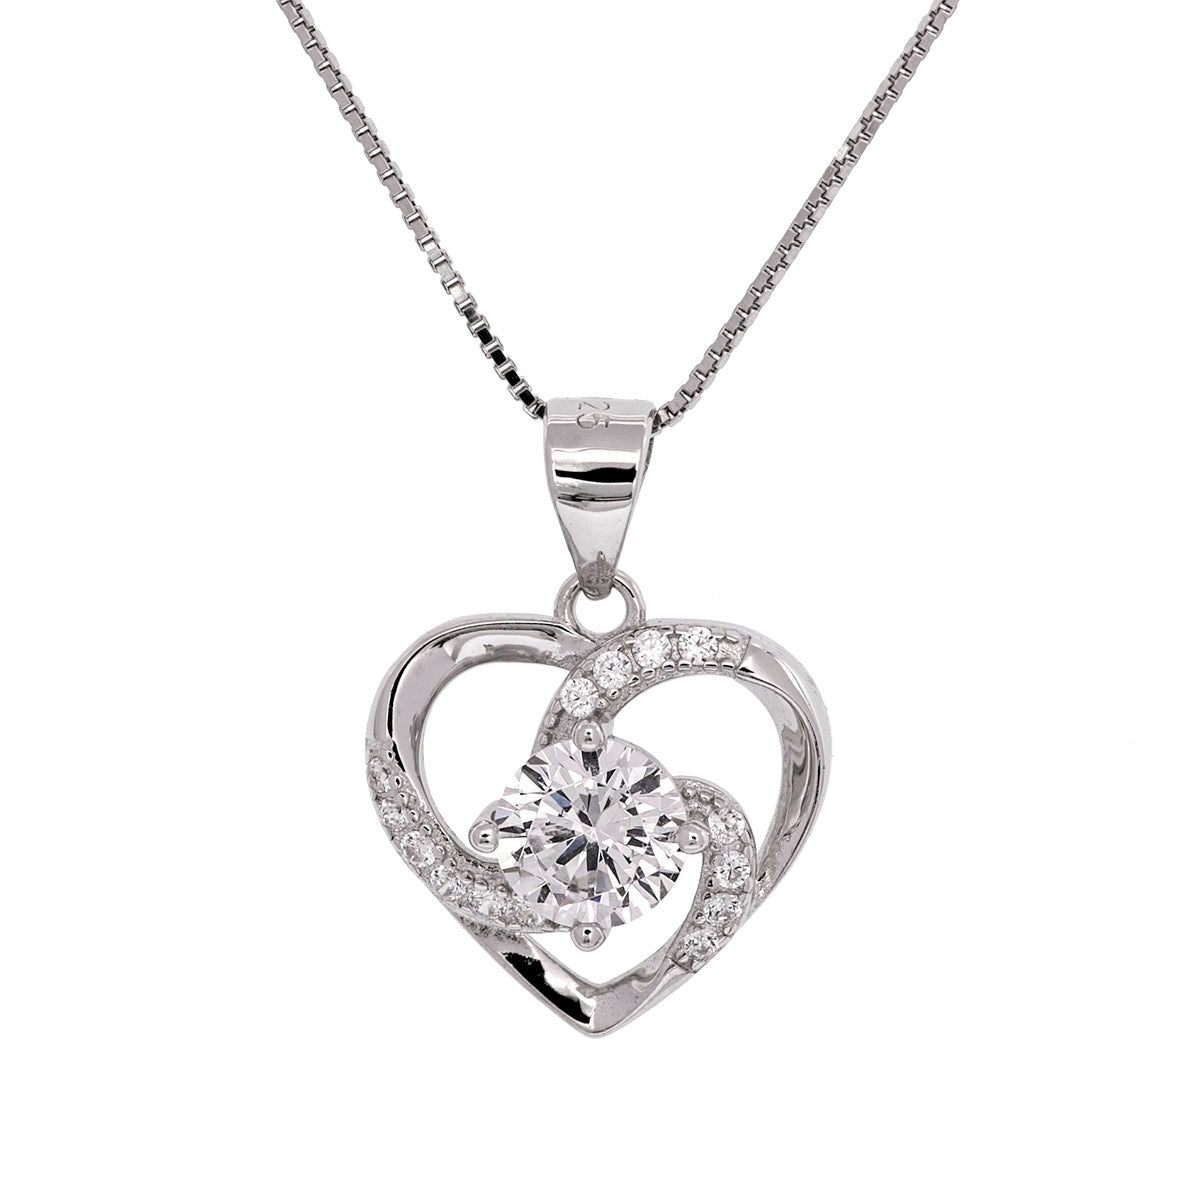 The Day I Met You Heart Swirl Silver Necklace - Soulmate